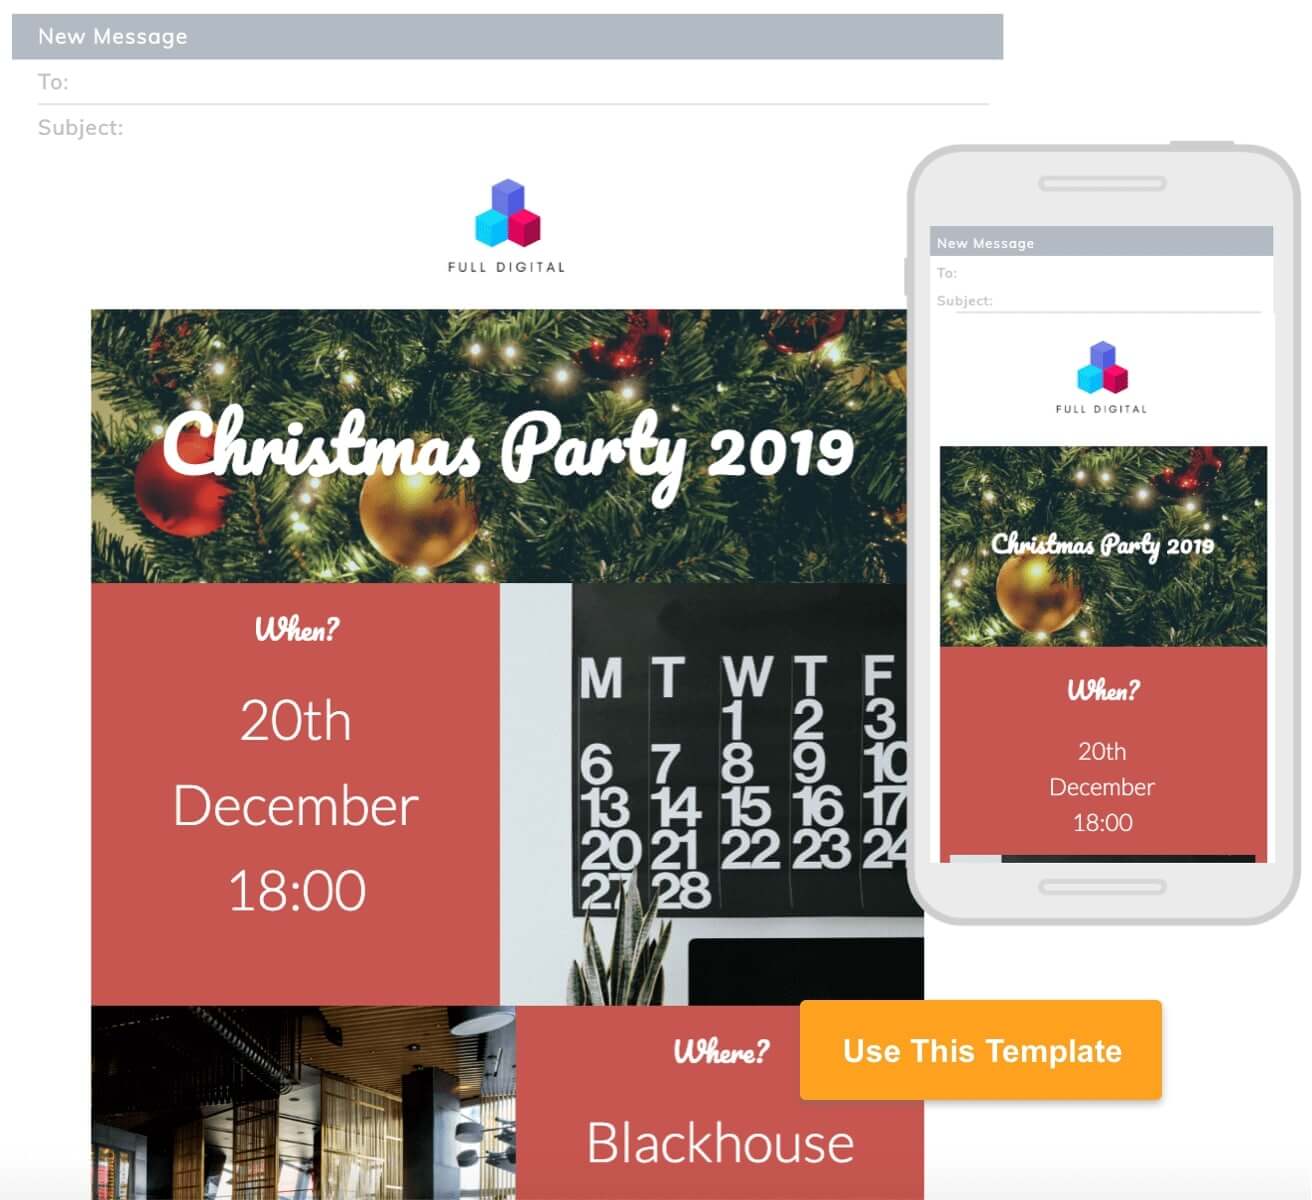 Company Christmas Party Invitation Newsletter